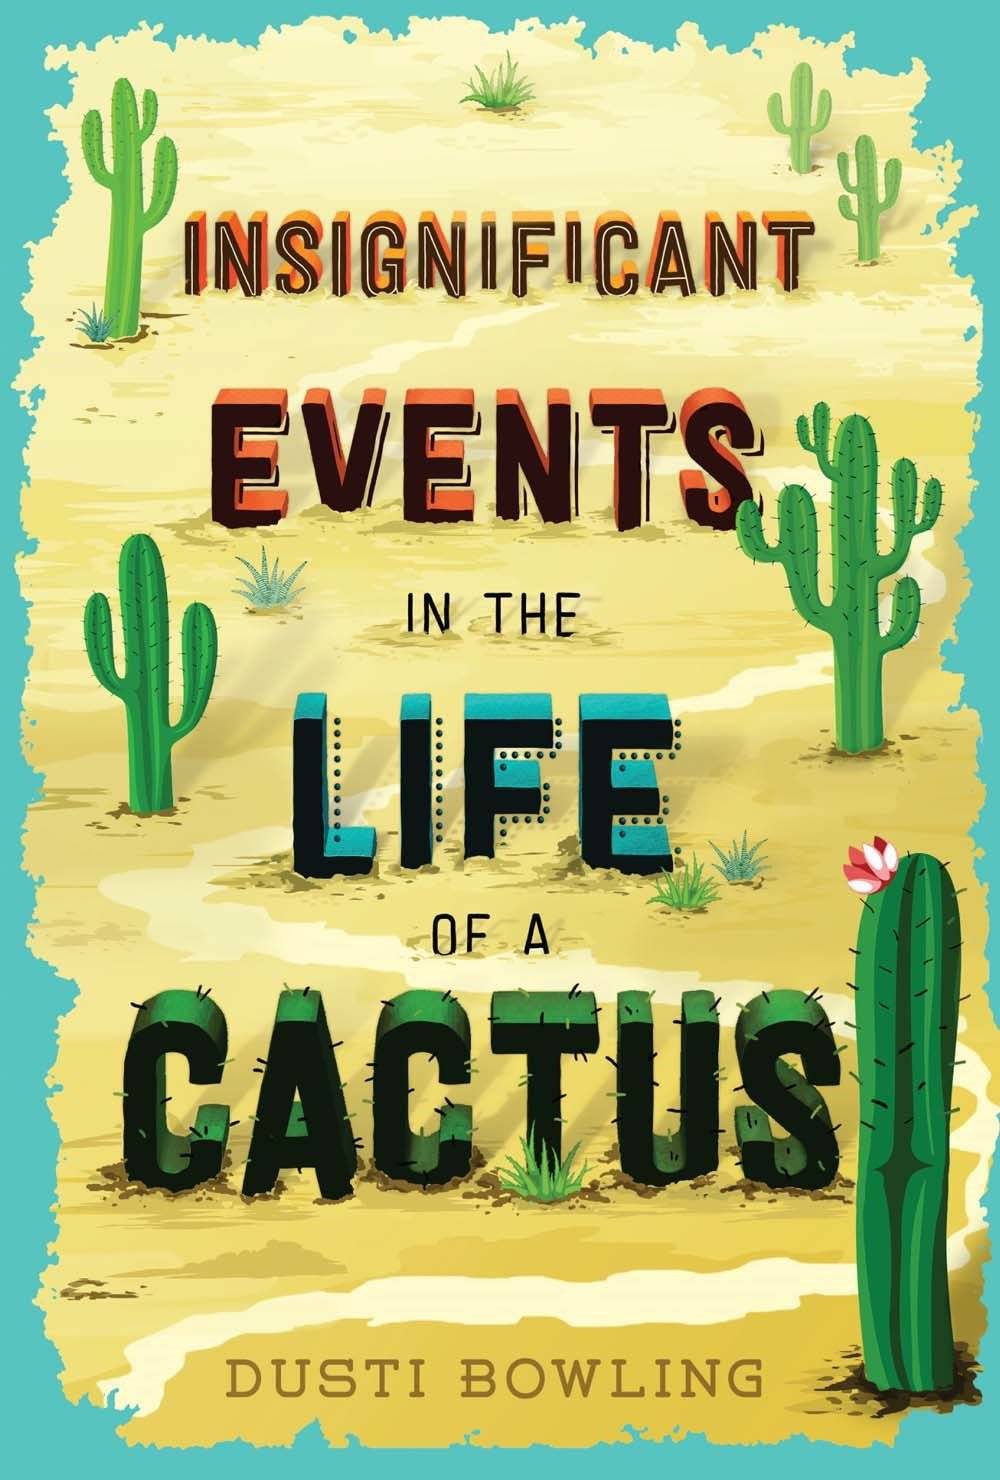 "Insignificant Events in the Life of a Cactus" book cover featuring block text in a desert, surrounded by cacti.